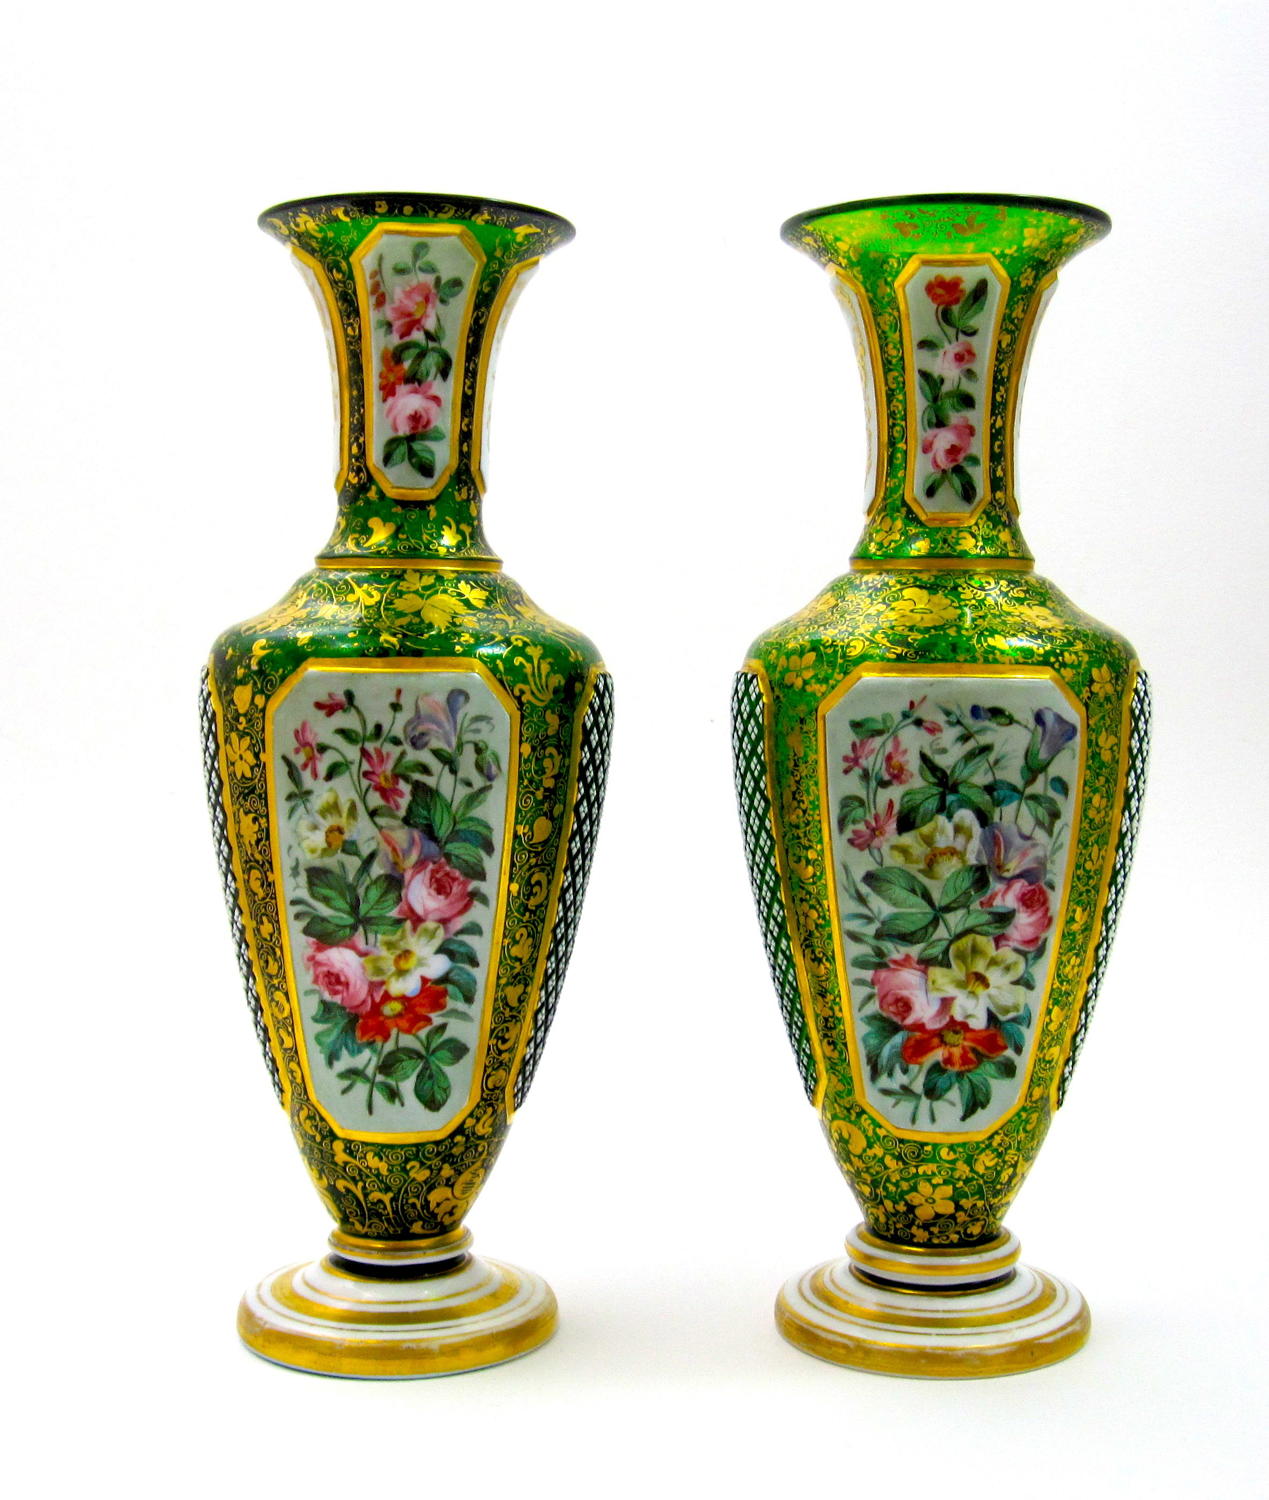 Pair of Antique Bohemian Green Overlay Glass Vases